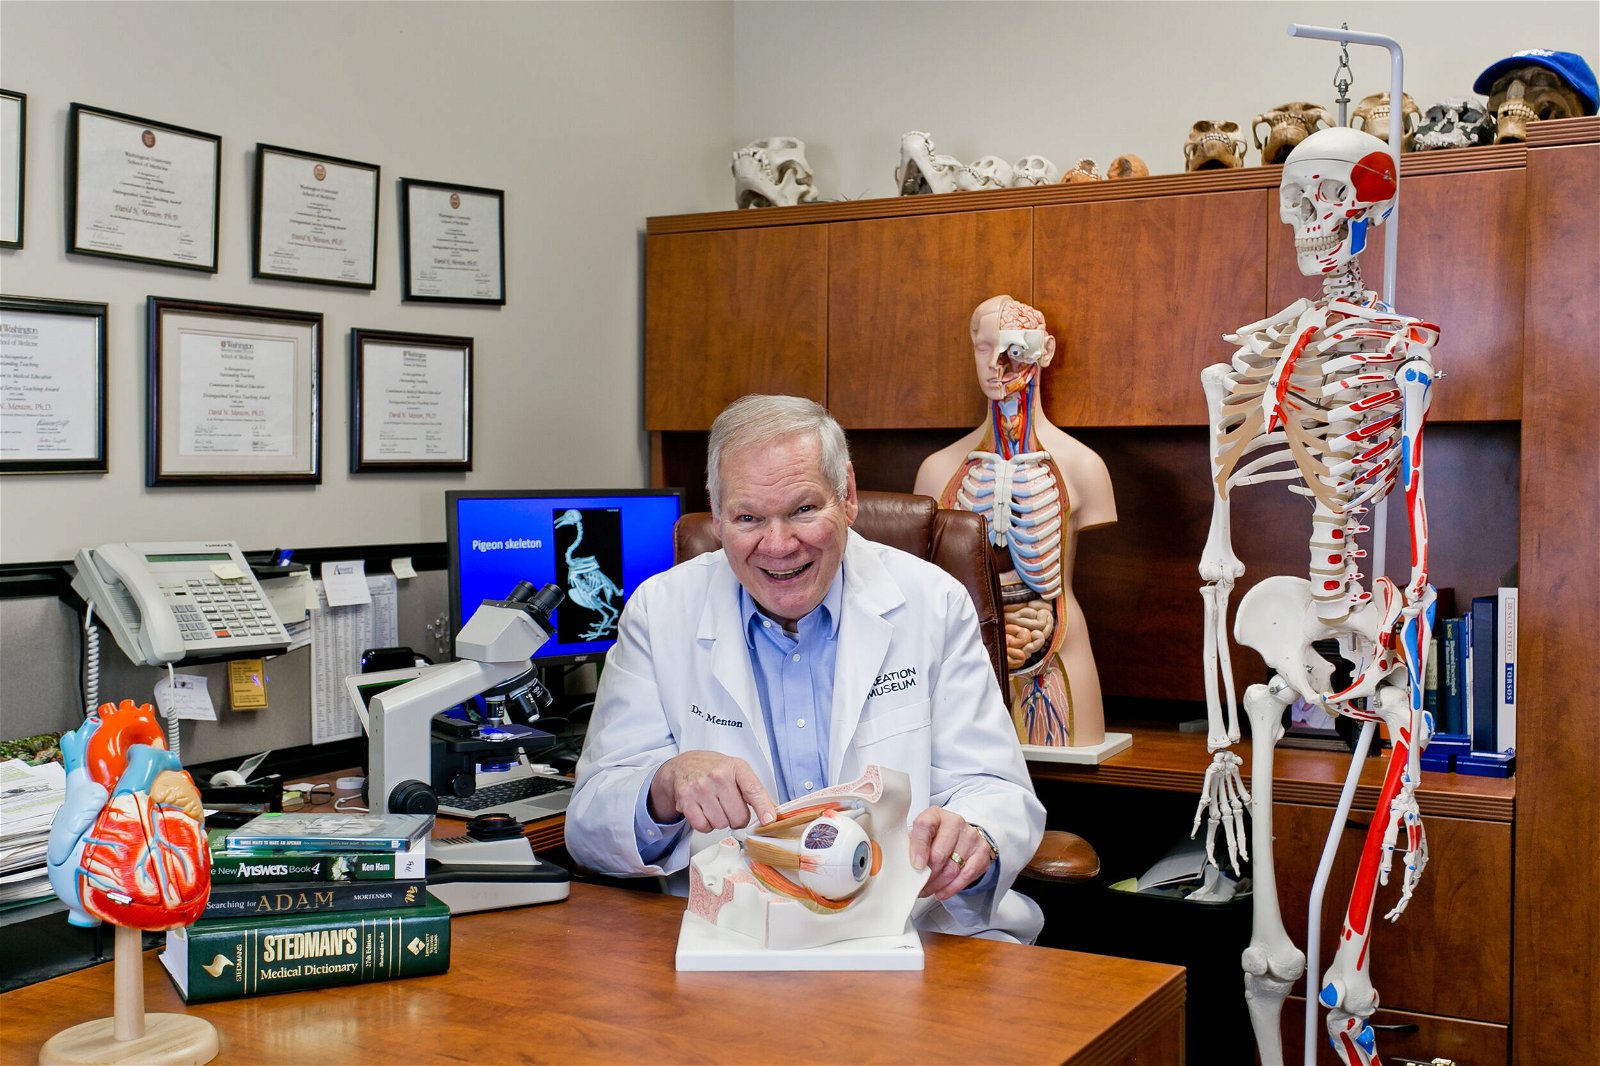 Dr. Menton sitting in his office.